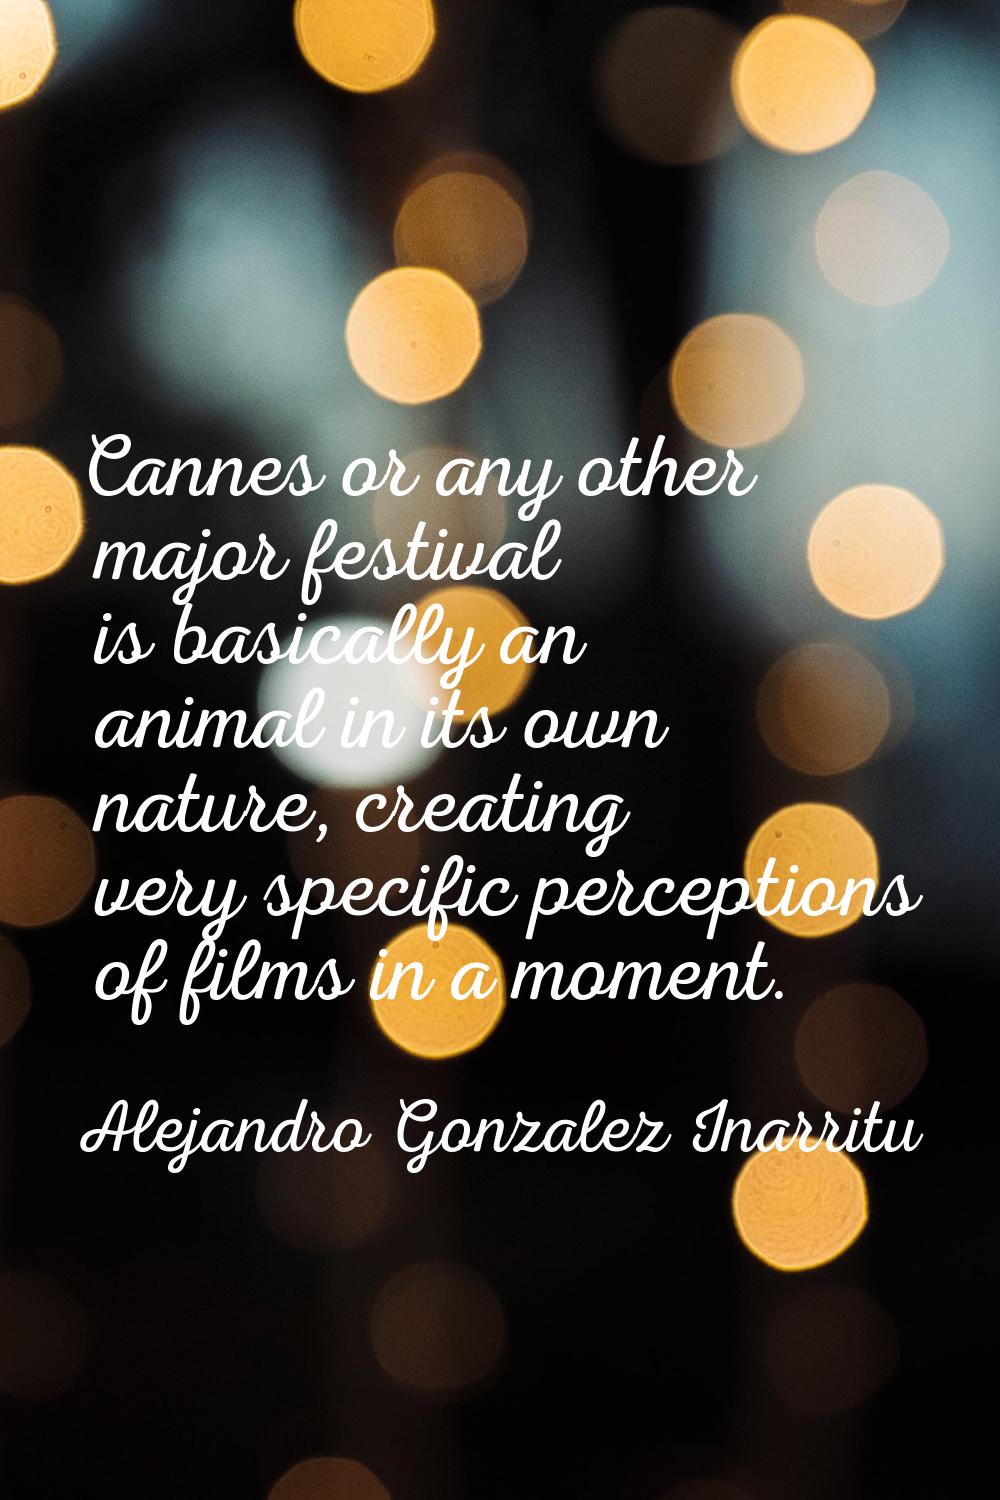 Cannes or any other major festival is basically an animal in its own nature, creating very specific